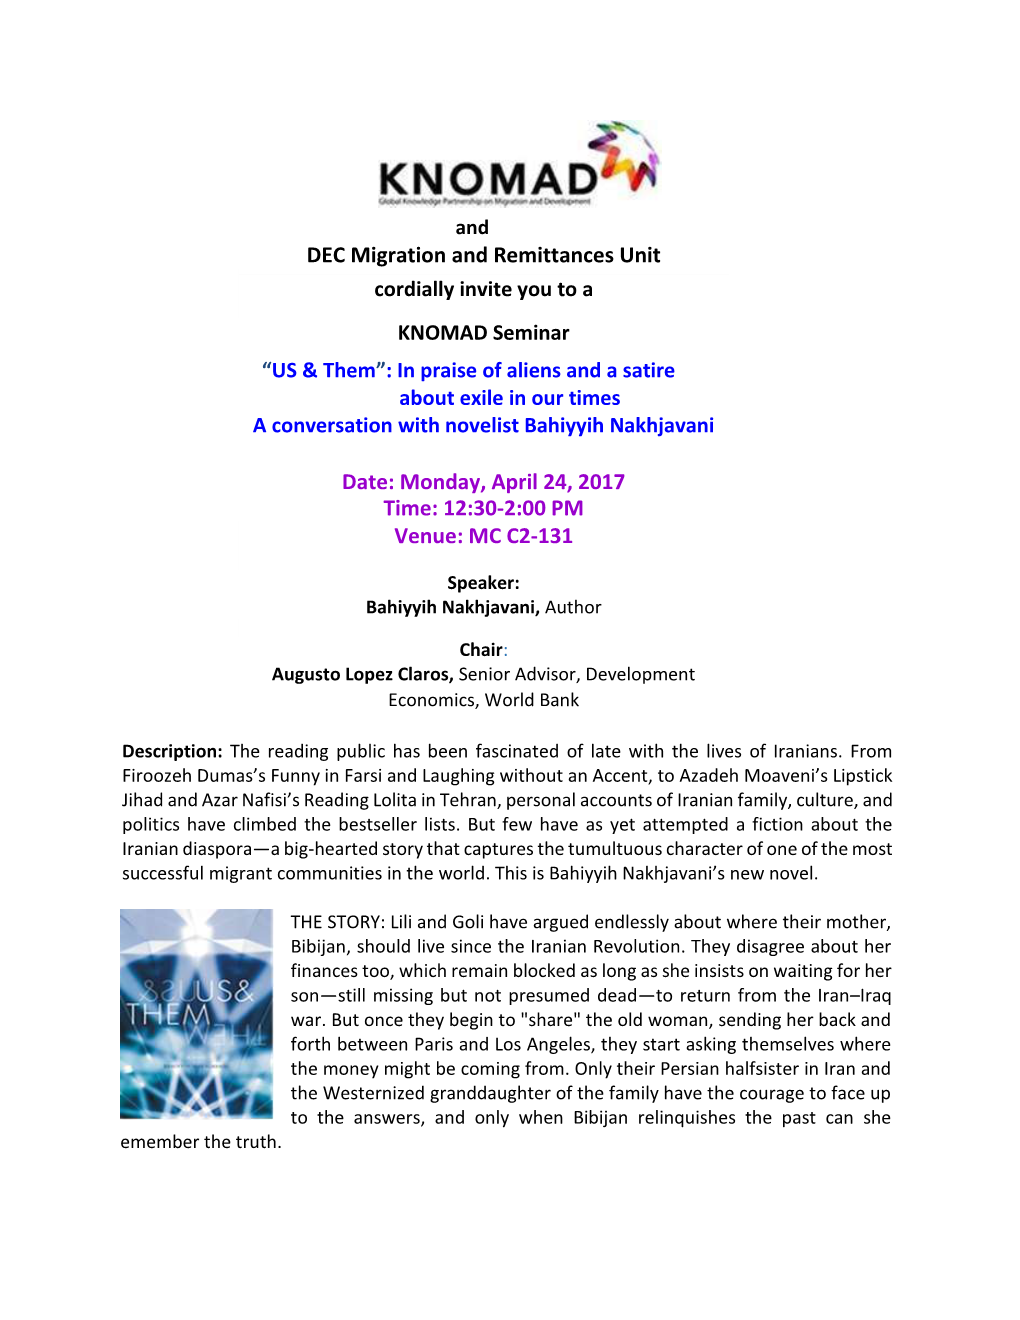 KNOMAD Seminar US & Them in Praise of Aliens and a Satire About